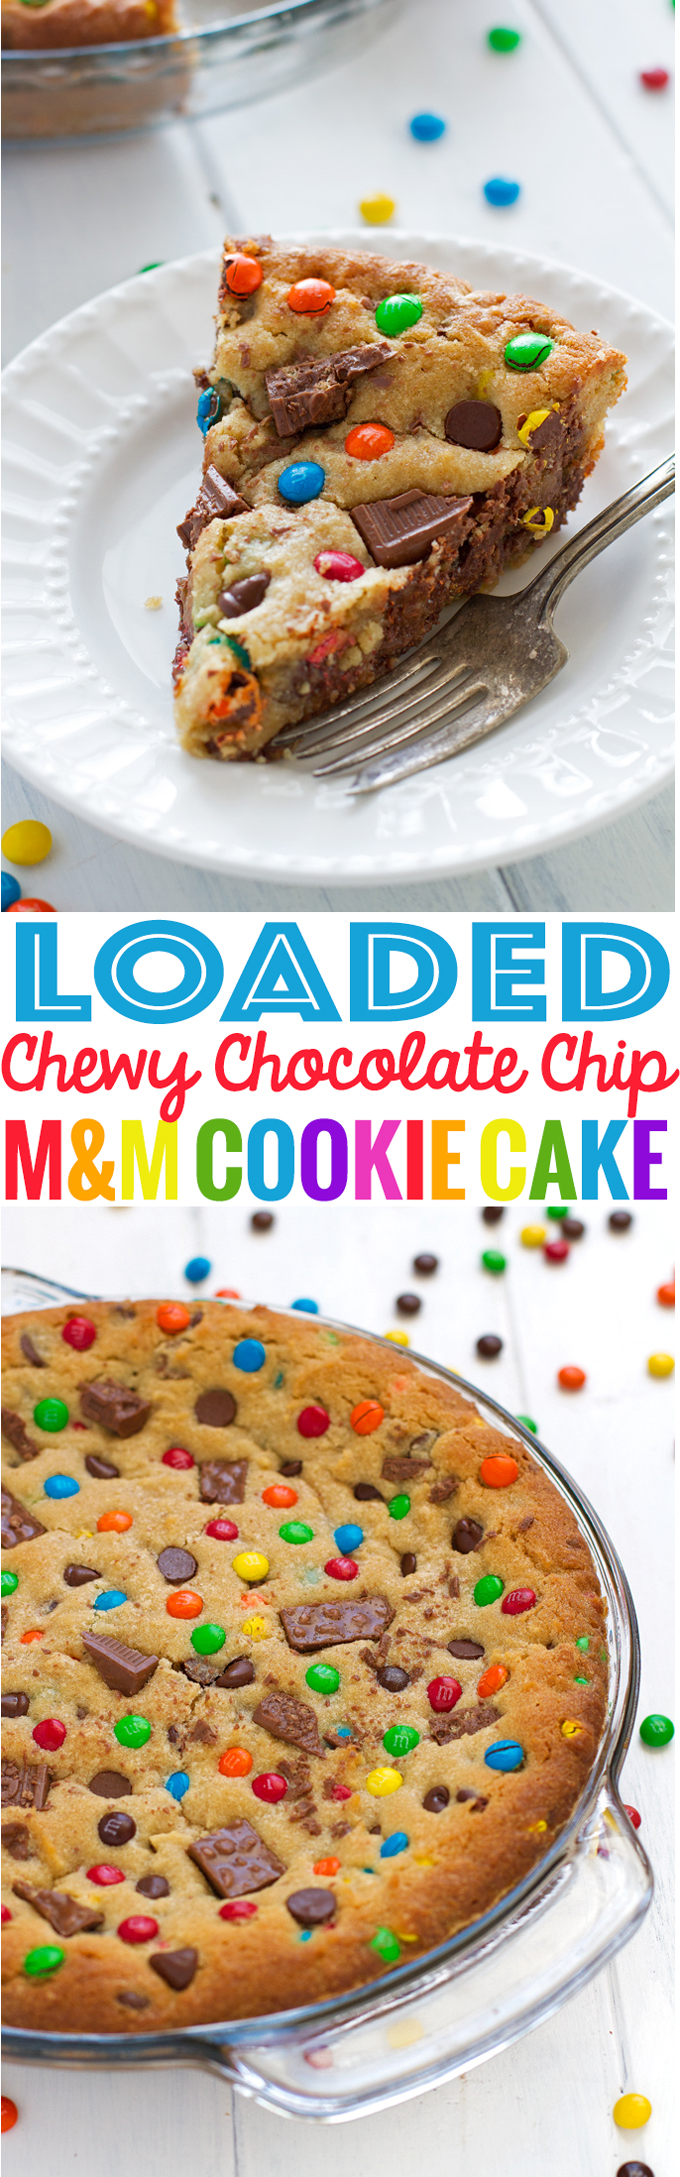 Loaded Chewy Chocolate Chip M&M Cookie Cake #cookiecake #cookie #cake #chewychocolatechipcookie | Little Spice Jar